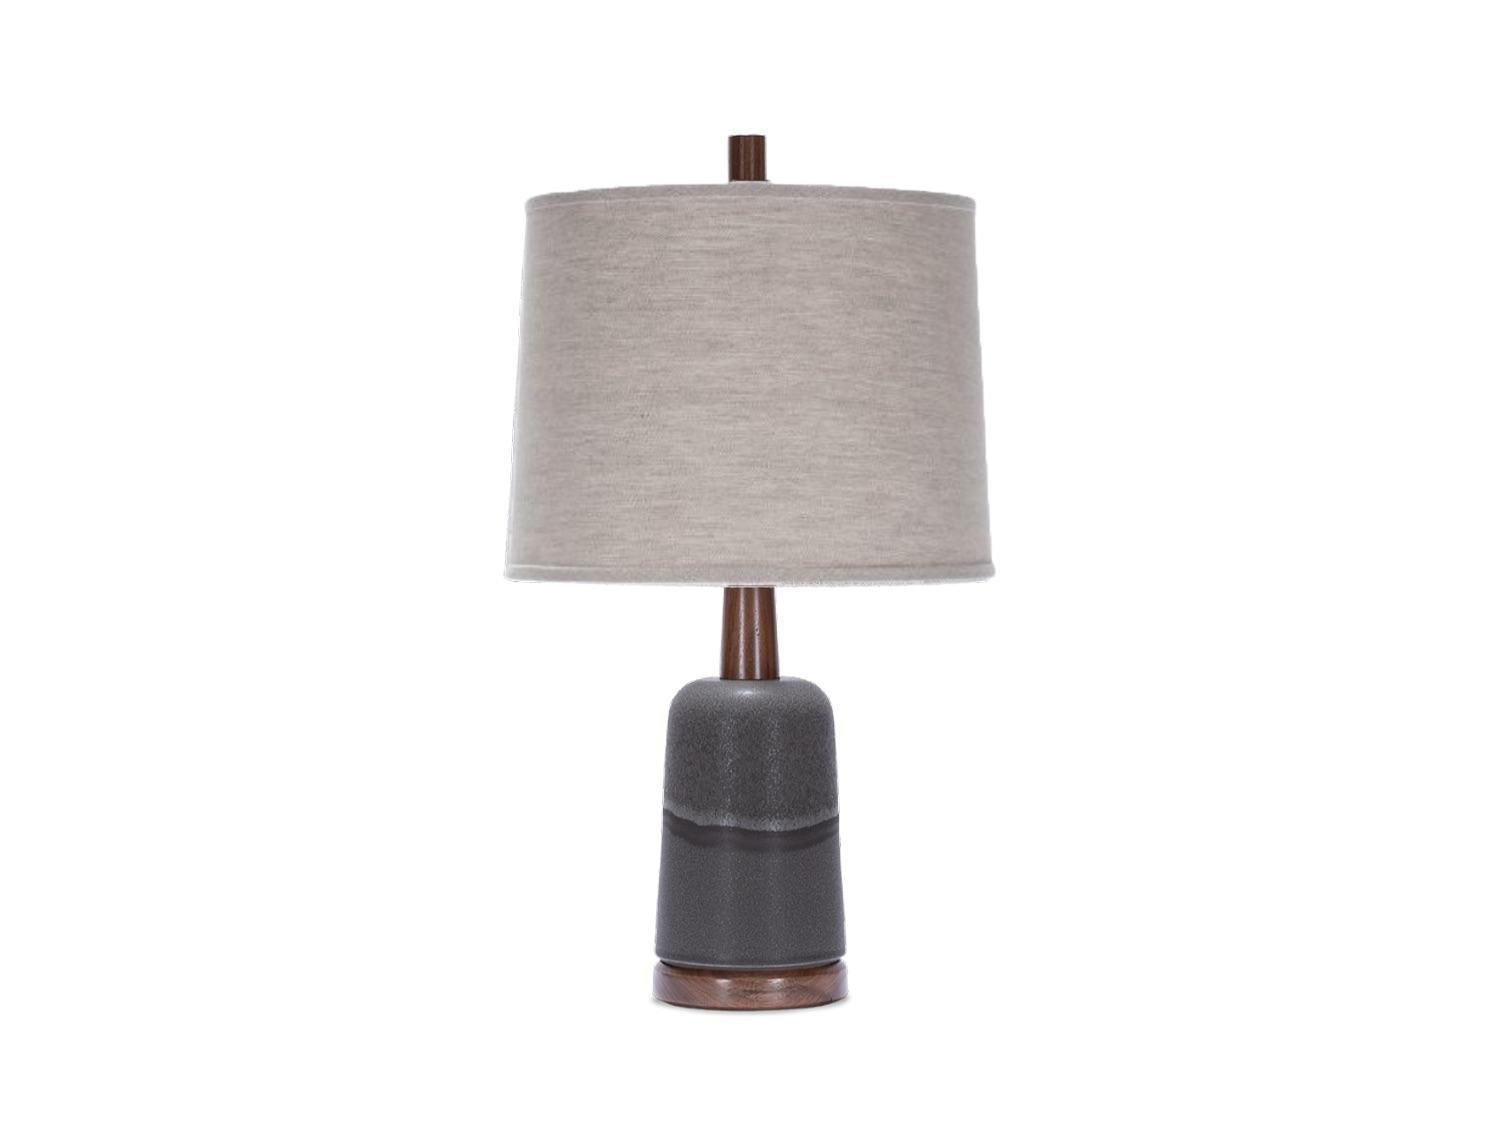 Handcrafted stoneware lamp made in upstate New York by Stone and Sawyer for Lawson-Fenning. Shown here in charcoal glaze, with walnut and satin brass details and a natural linen shade. 

Dimensions: 
Overall Height: 22 height
Shade: 12 diameter